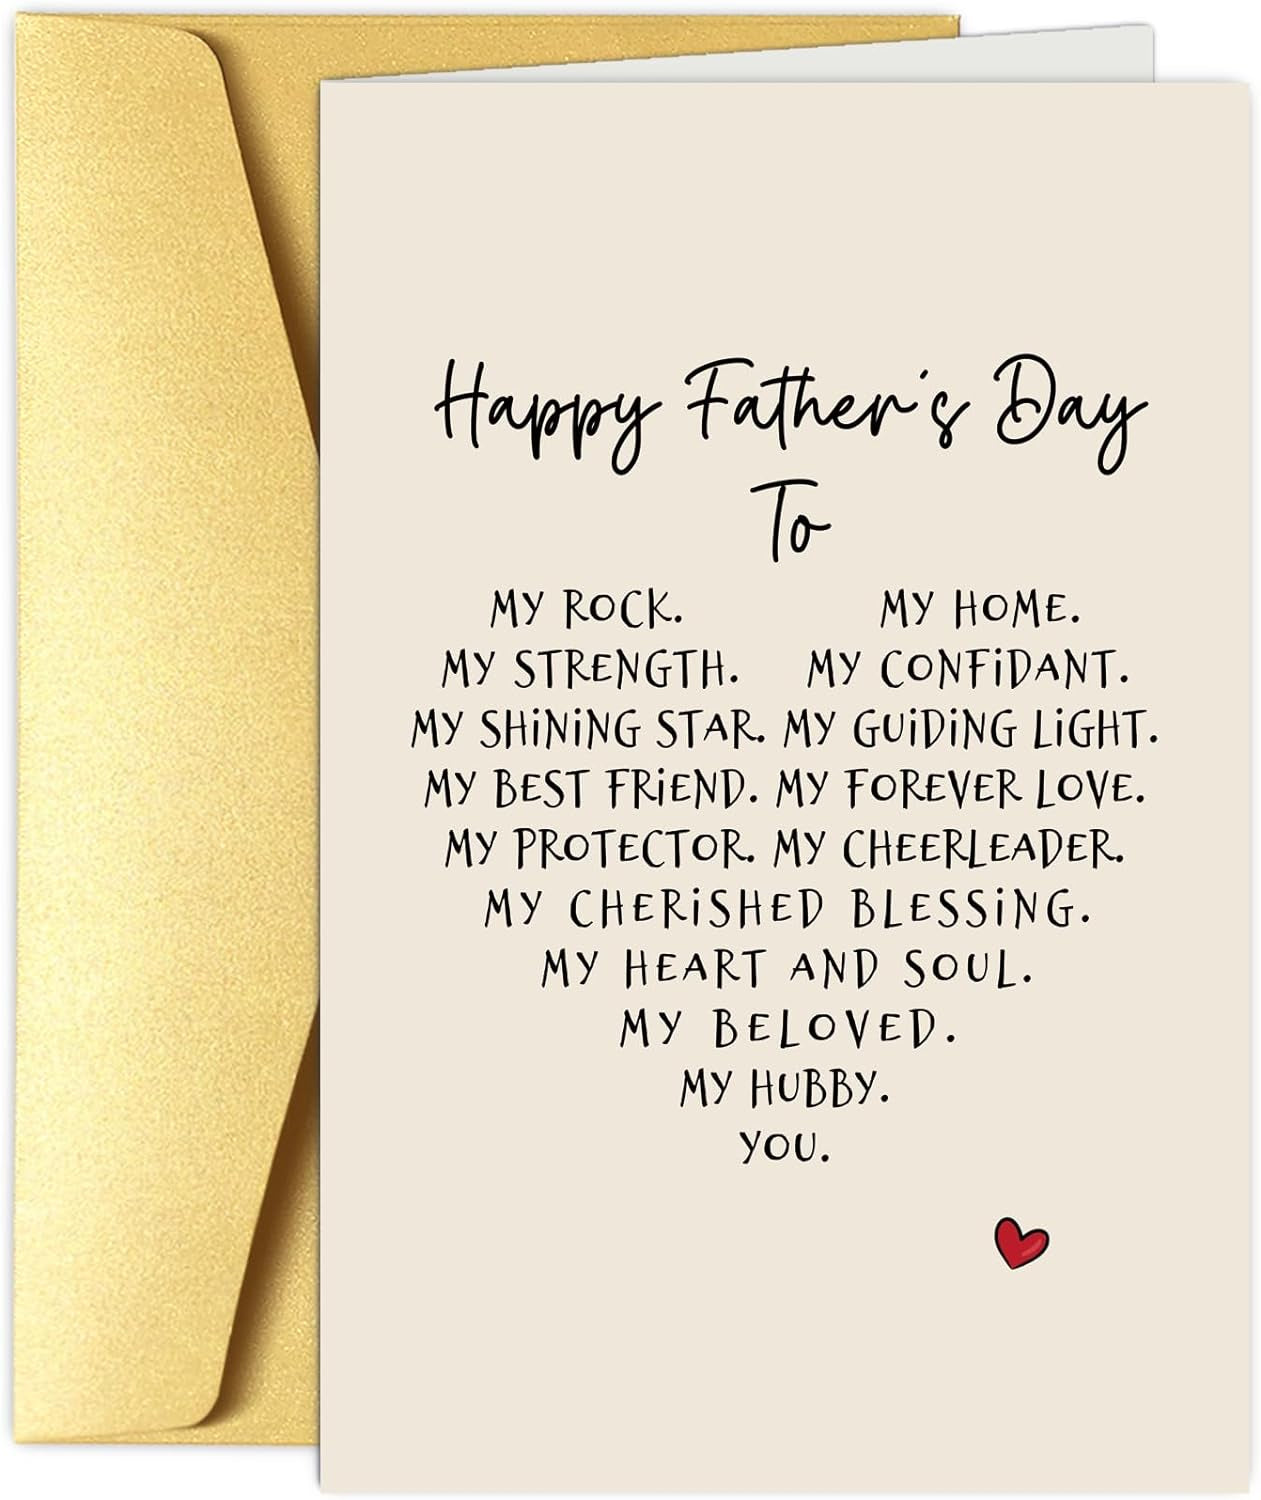 Romantic Poem Father'S Day Card for Husband, Sweet Husband Fathers Day Card from Wife, Happy Father'S Day to My Dear Hubby